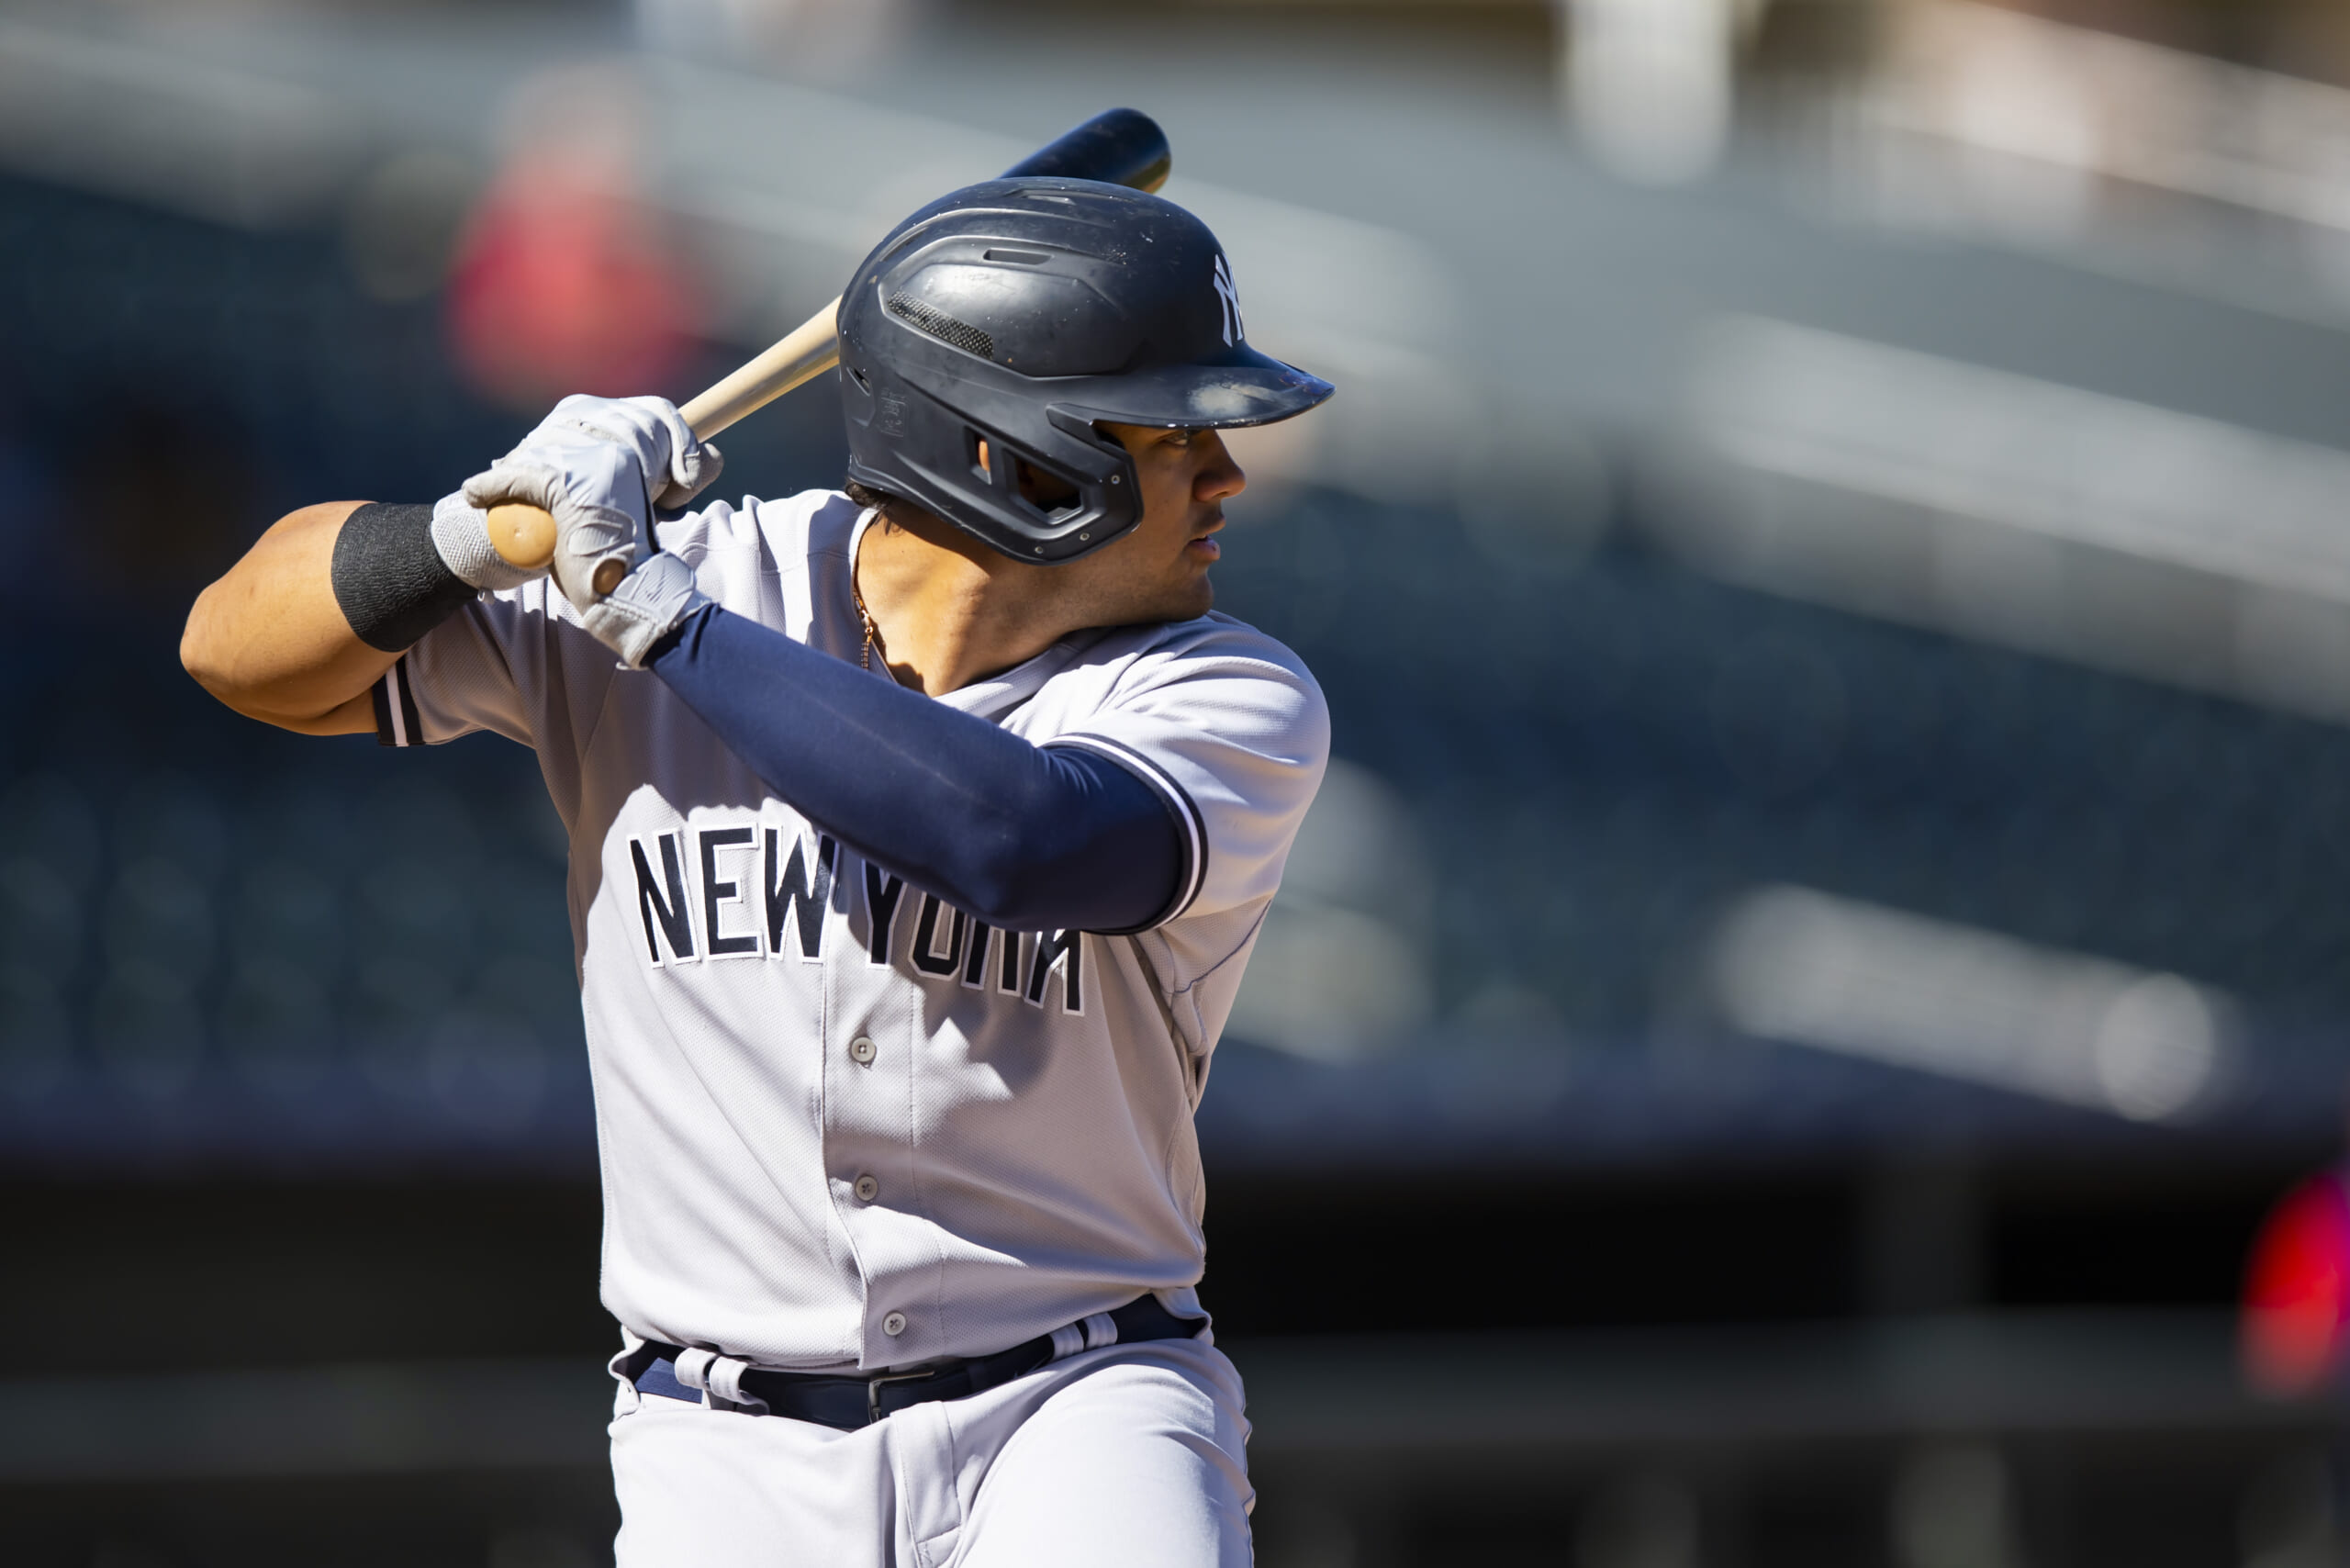 Three Players the Yankees Should Trade Jasson Dominguez For